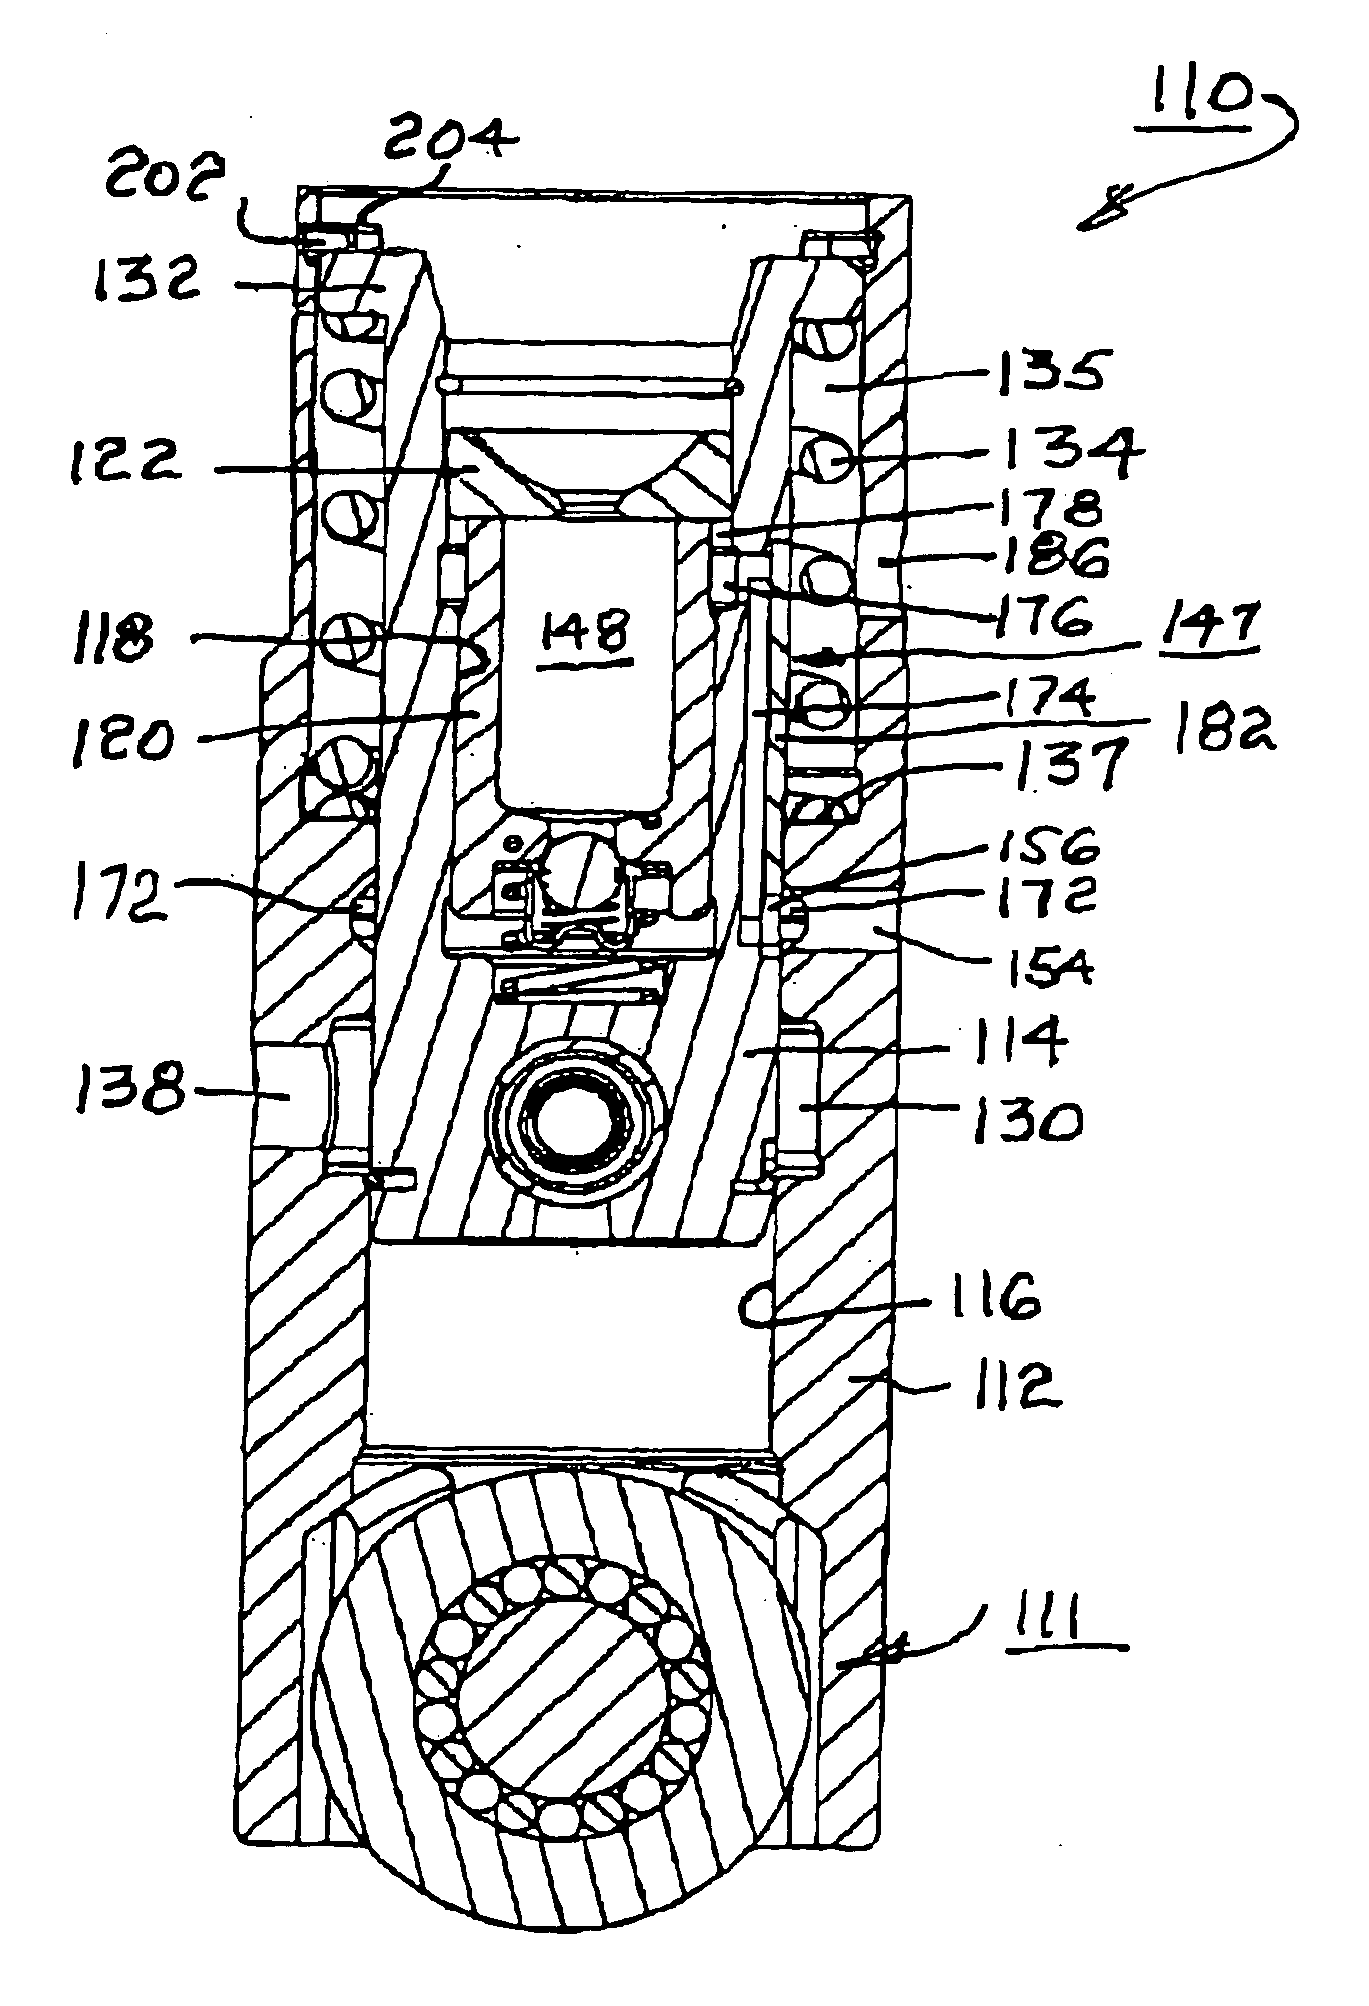 Valve-deactivating hydraulic lifter having a vented internal lost motion spring